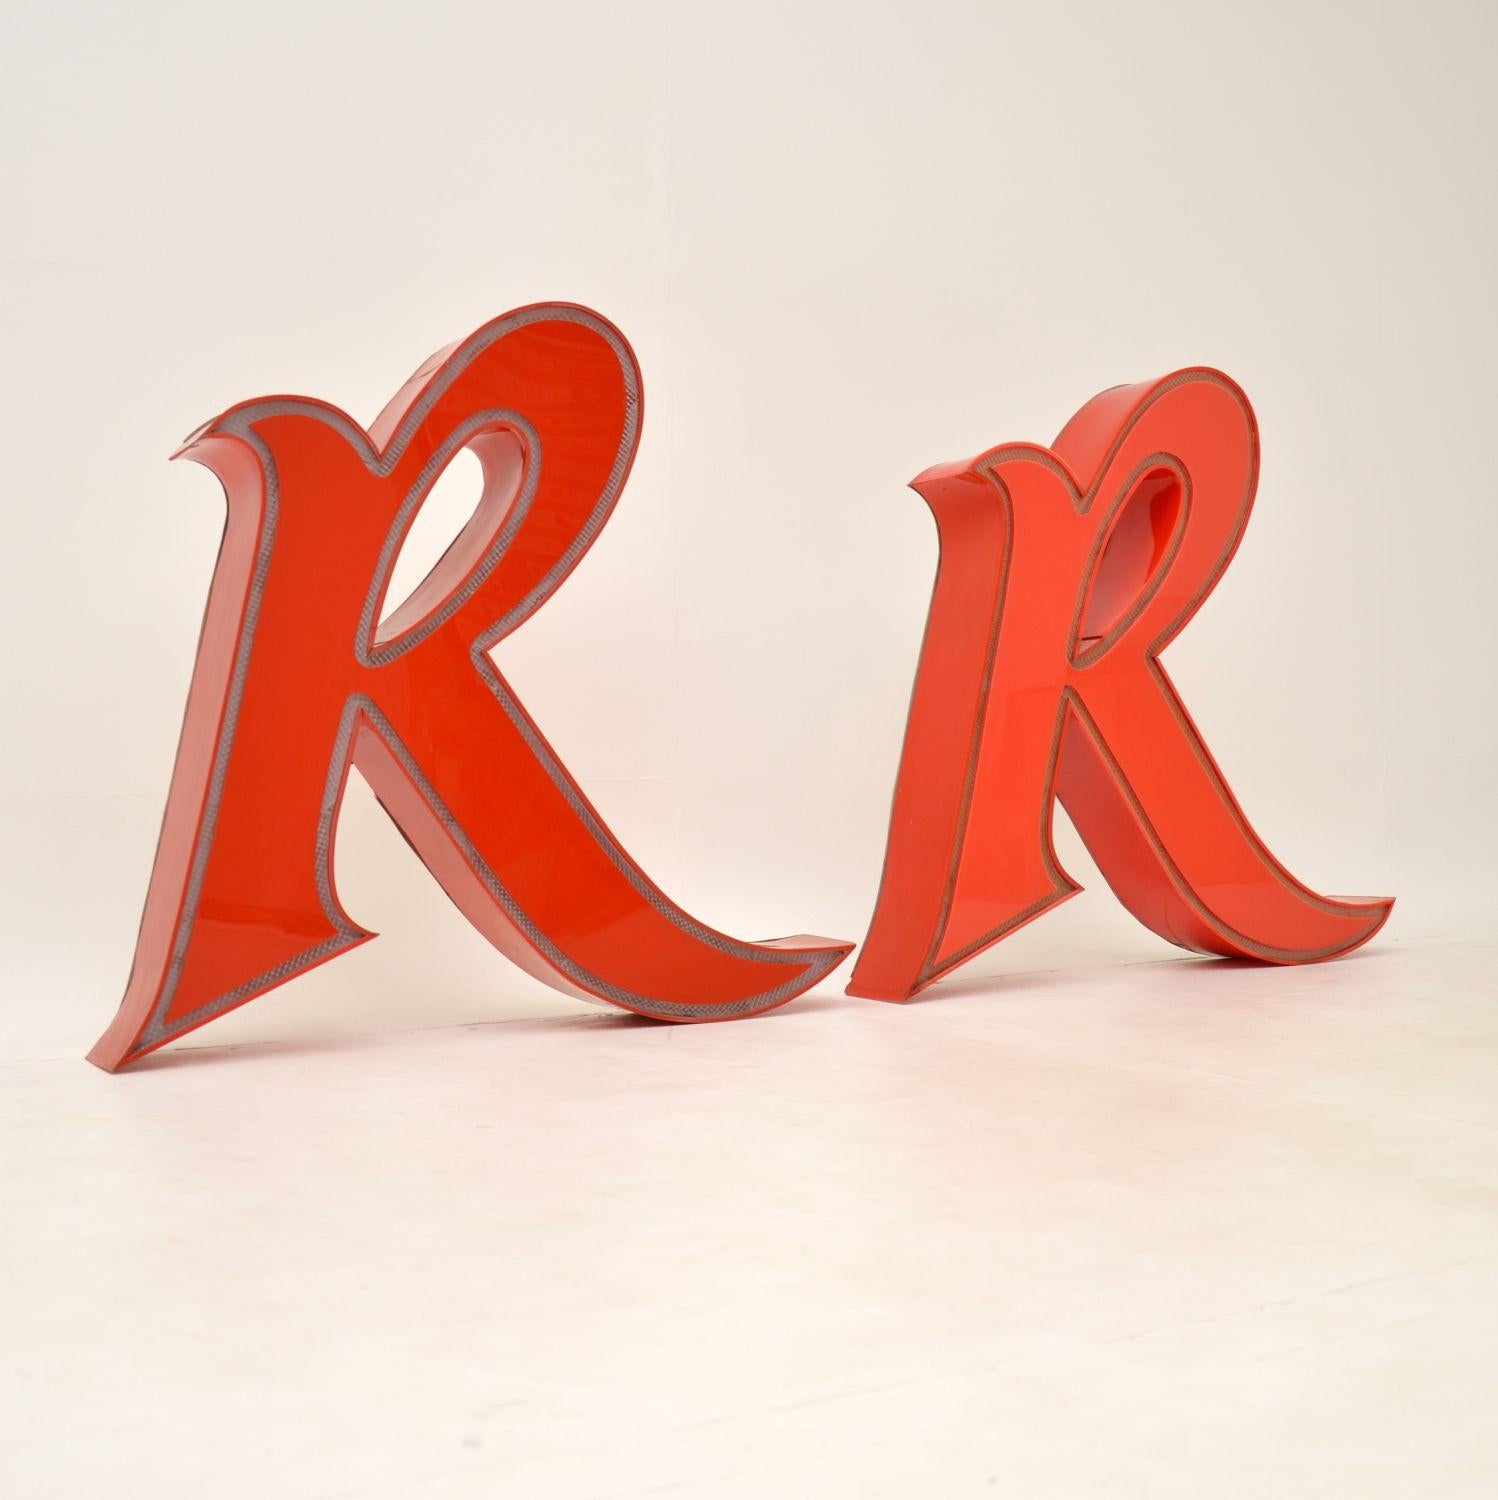 A wonderful pair of vintage large American diner lights shaped as the letter R. This date from around the 1950-60’s.

They have been fitted with LED lights by the previous owner, and each has an AC adapter plug and cable which powers them. they